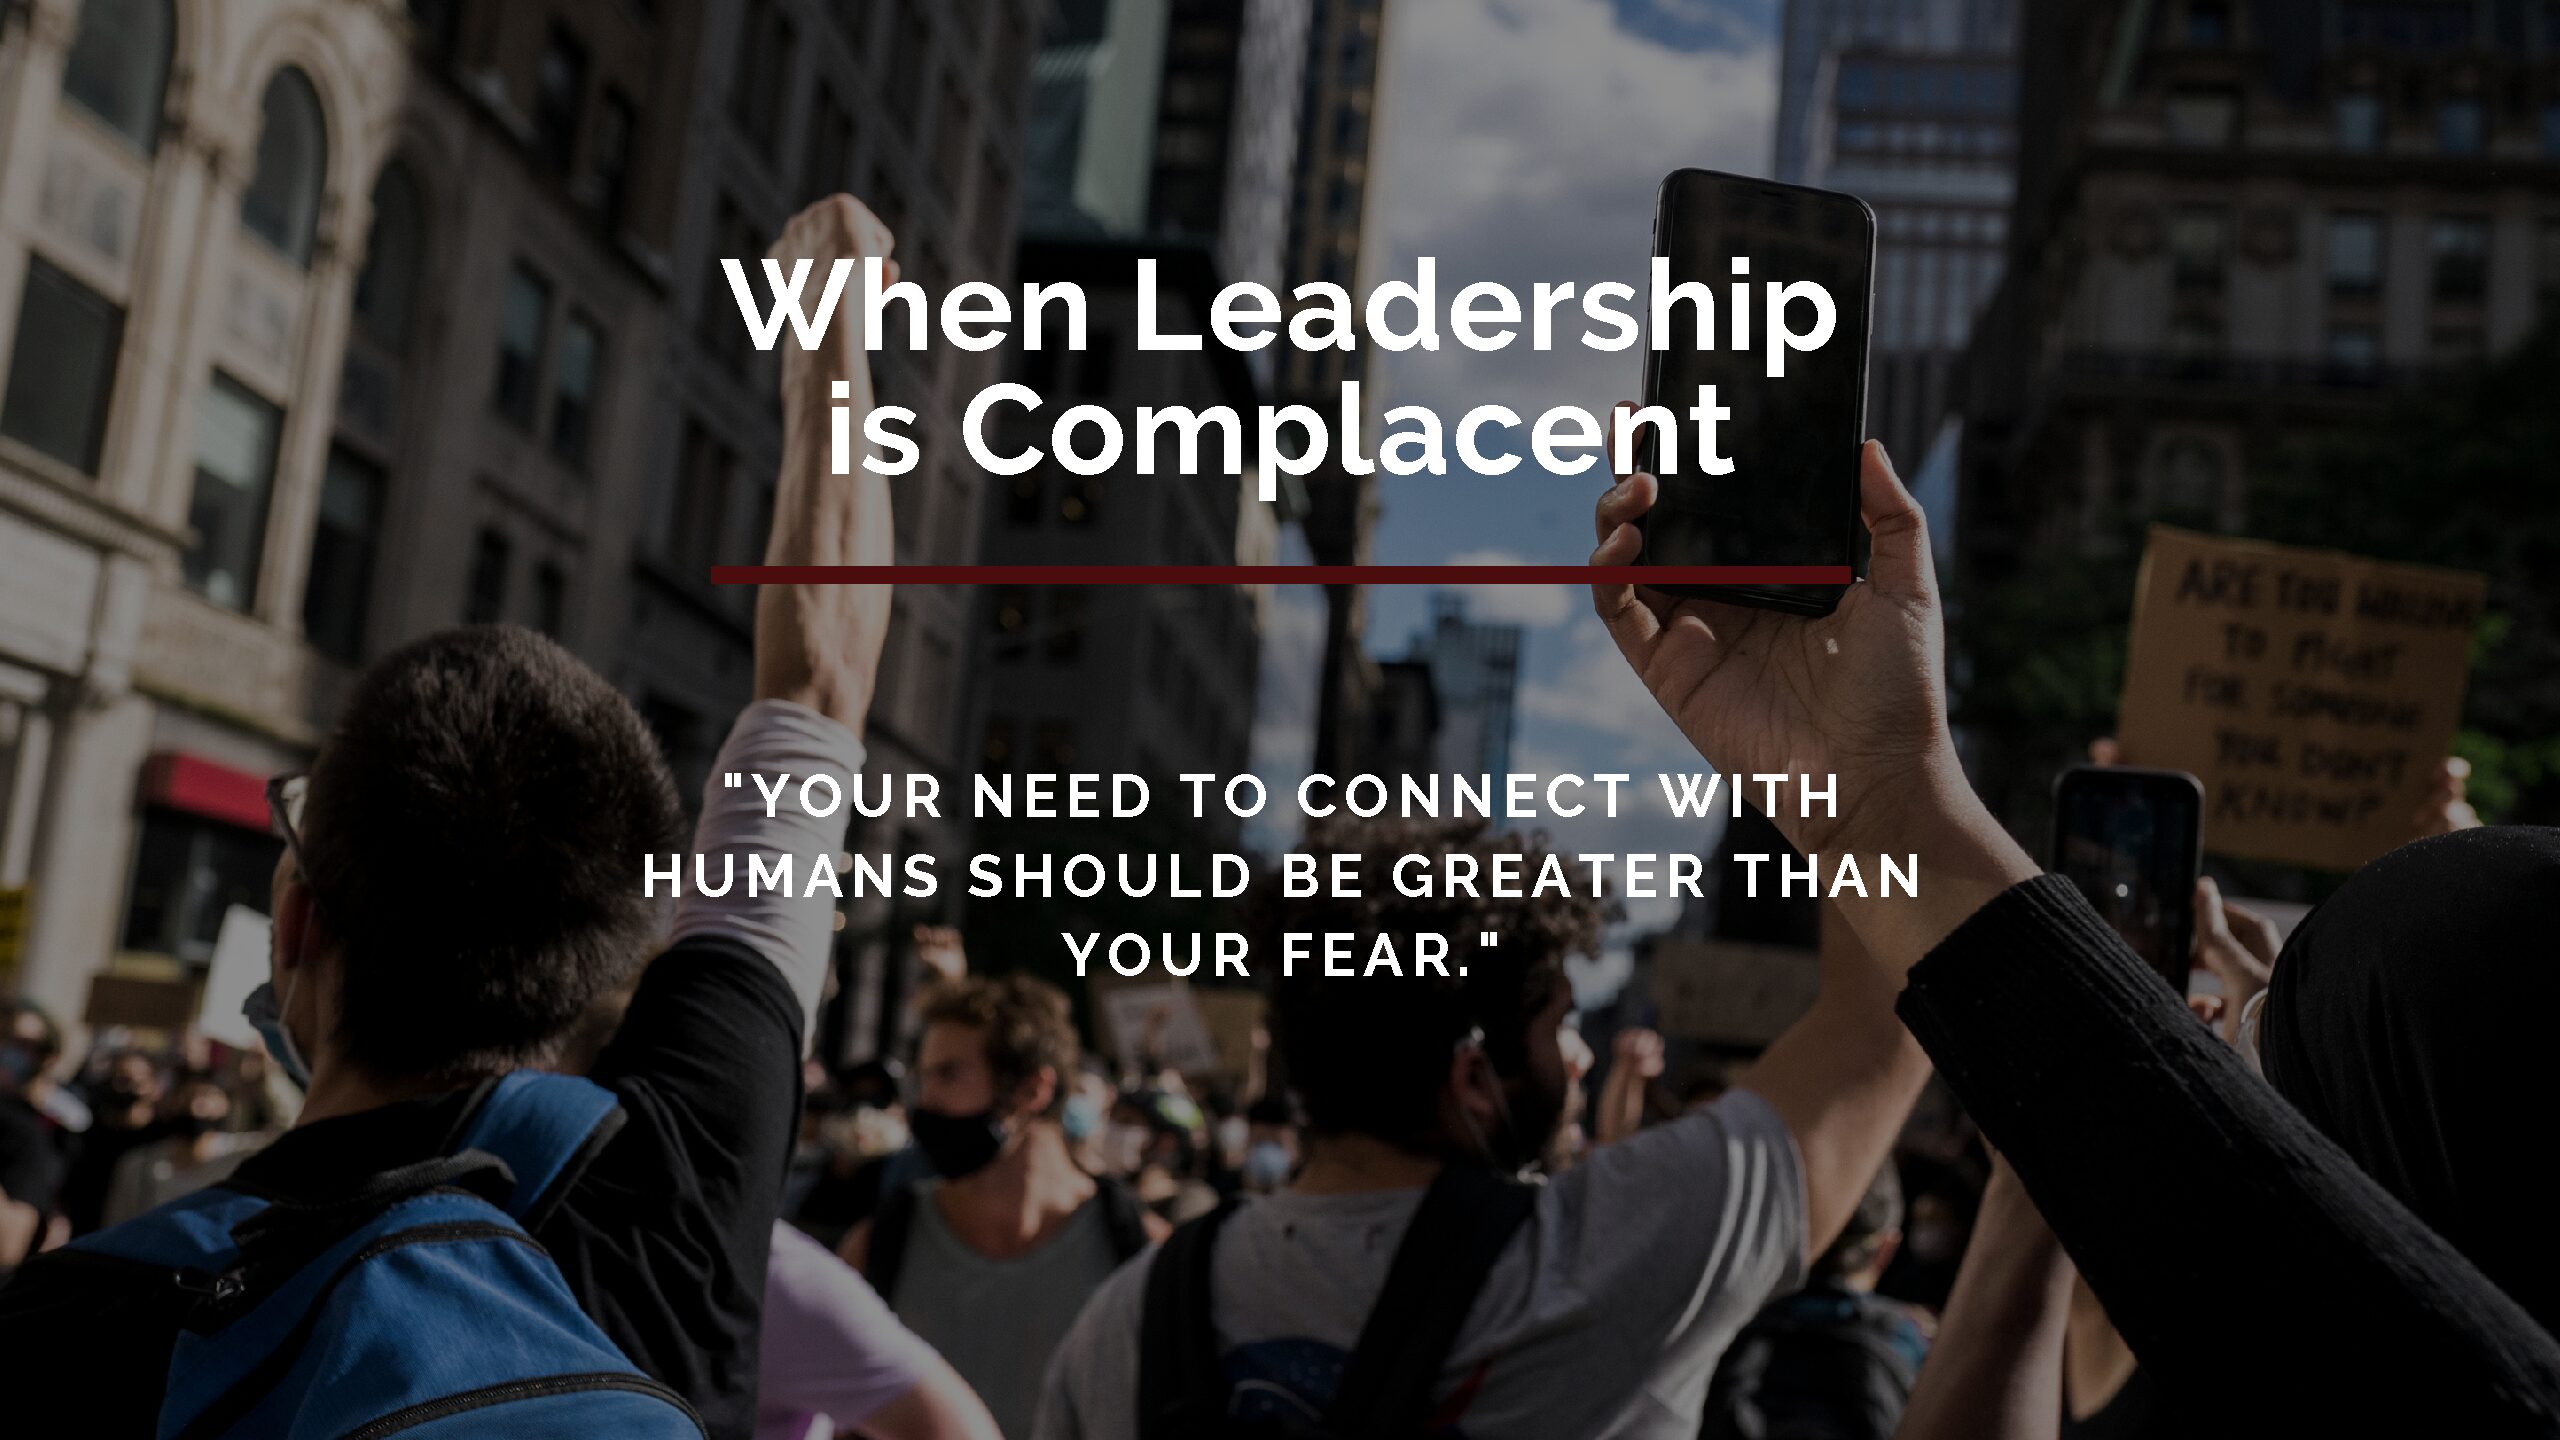 When Leadership is Complacent